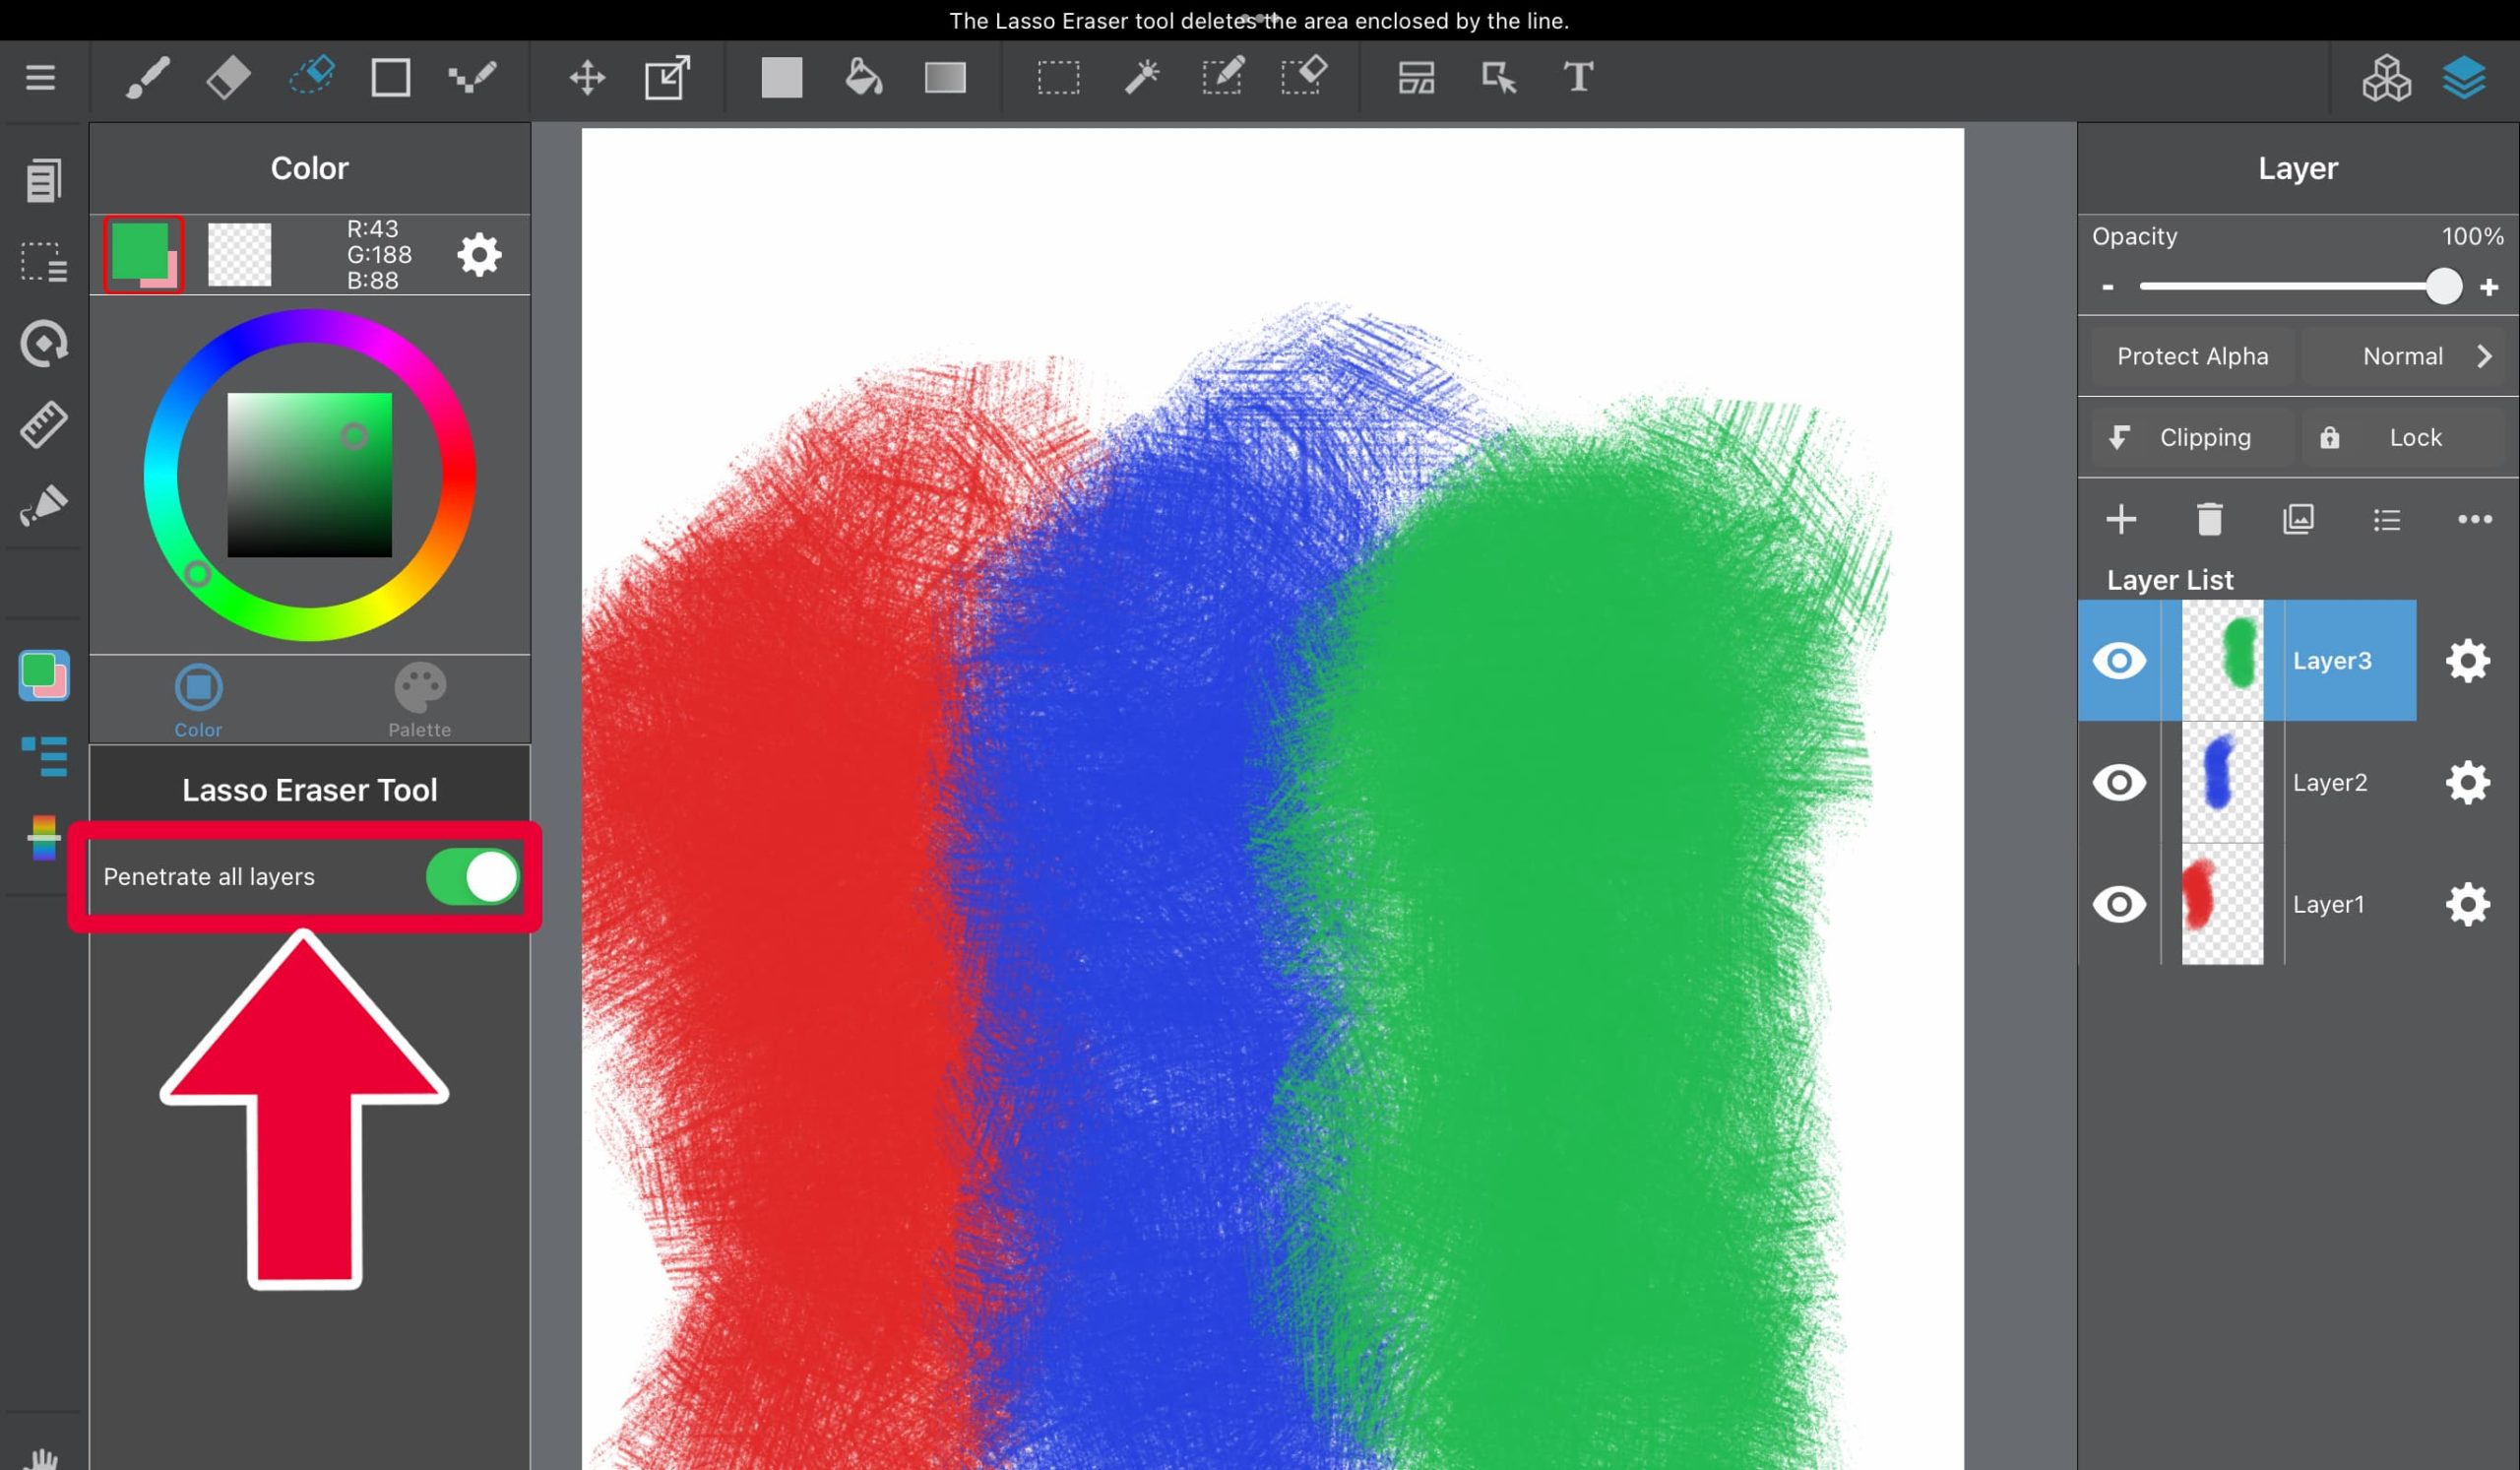 [iPad] How to Use the Eraser(Lasso) Tool - Penetrate all layers